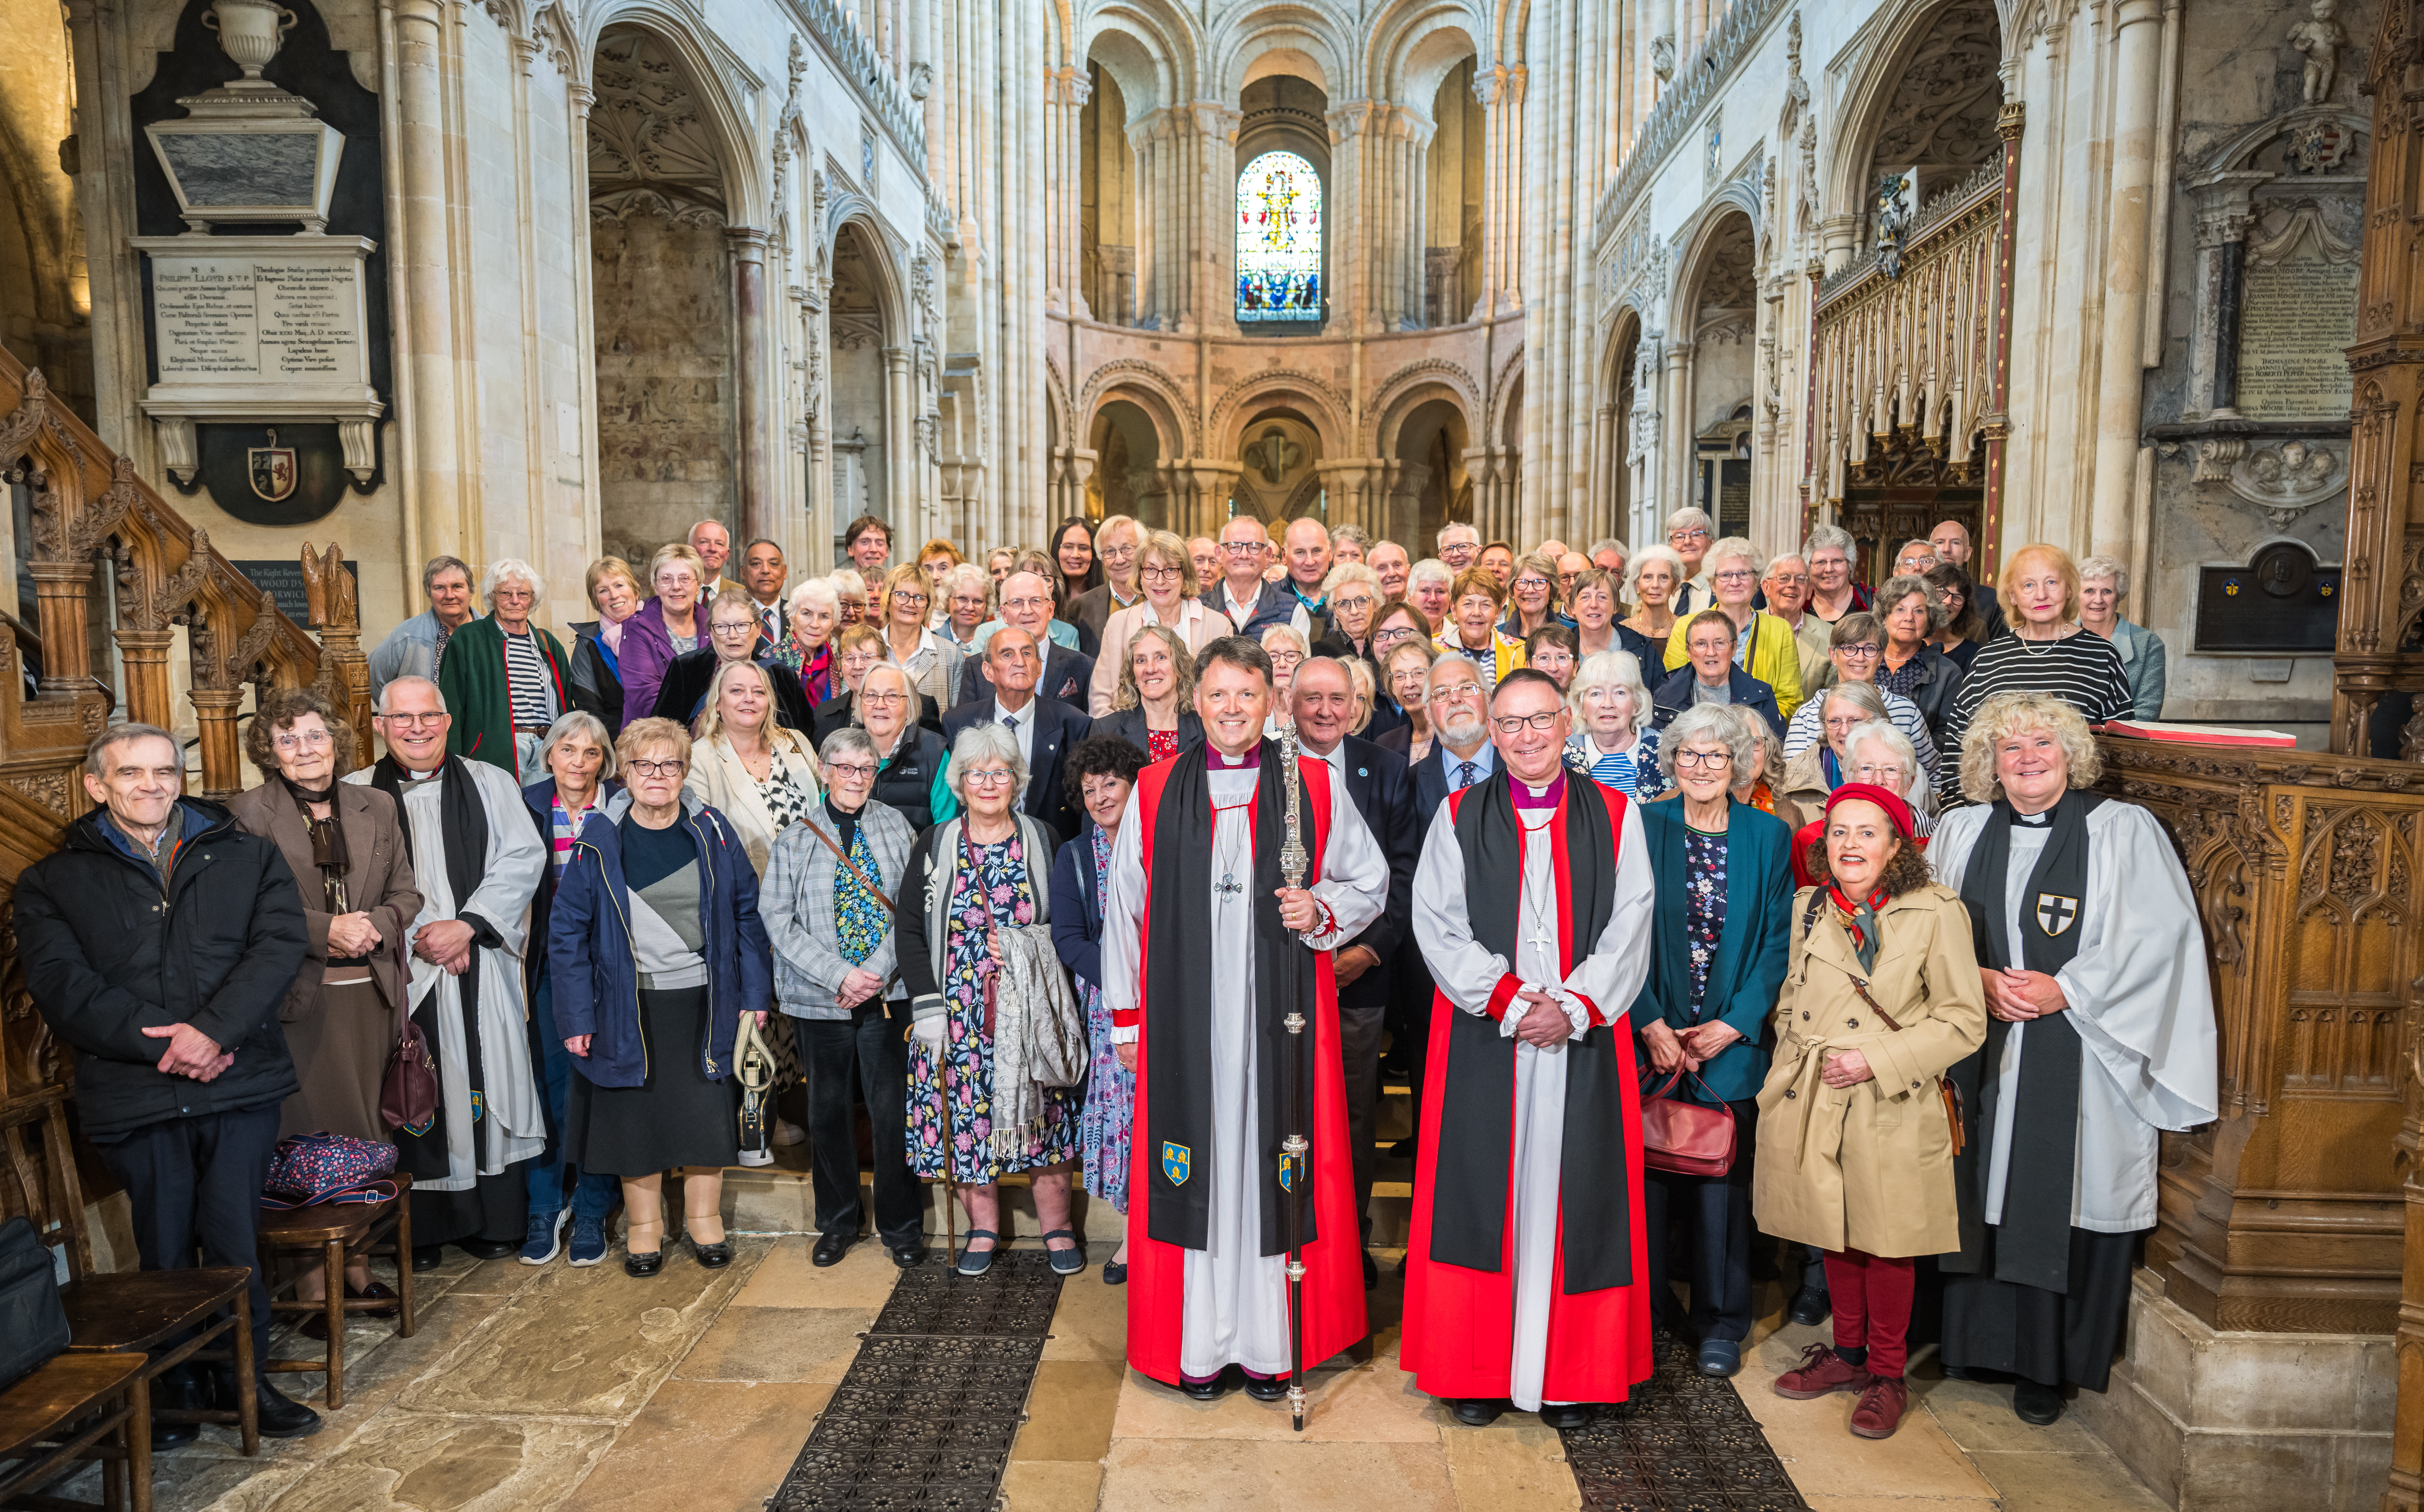 A group photo of the Churchwardens inside Norwich Cathedral